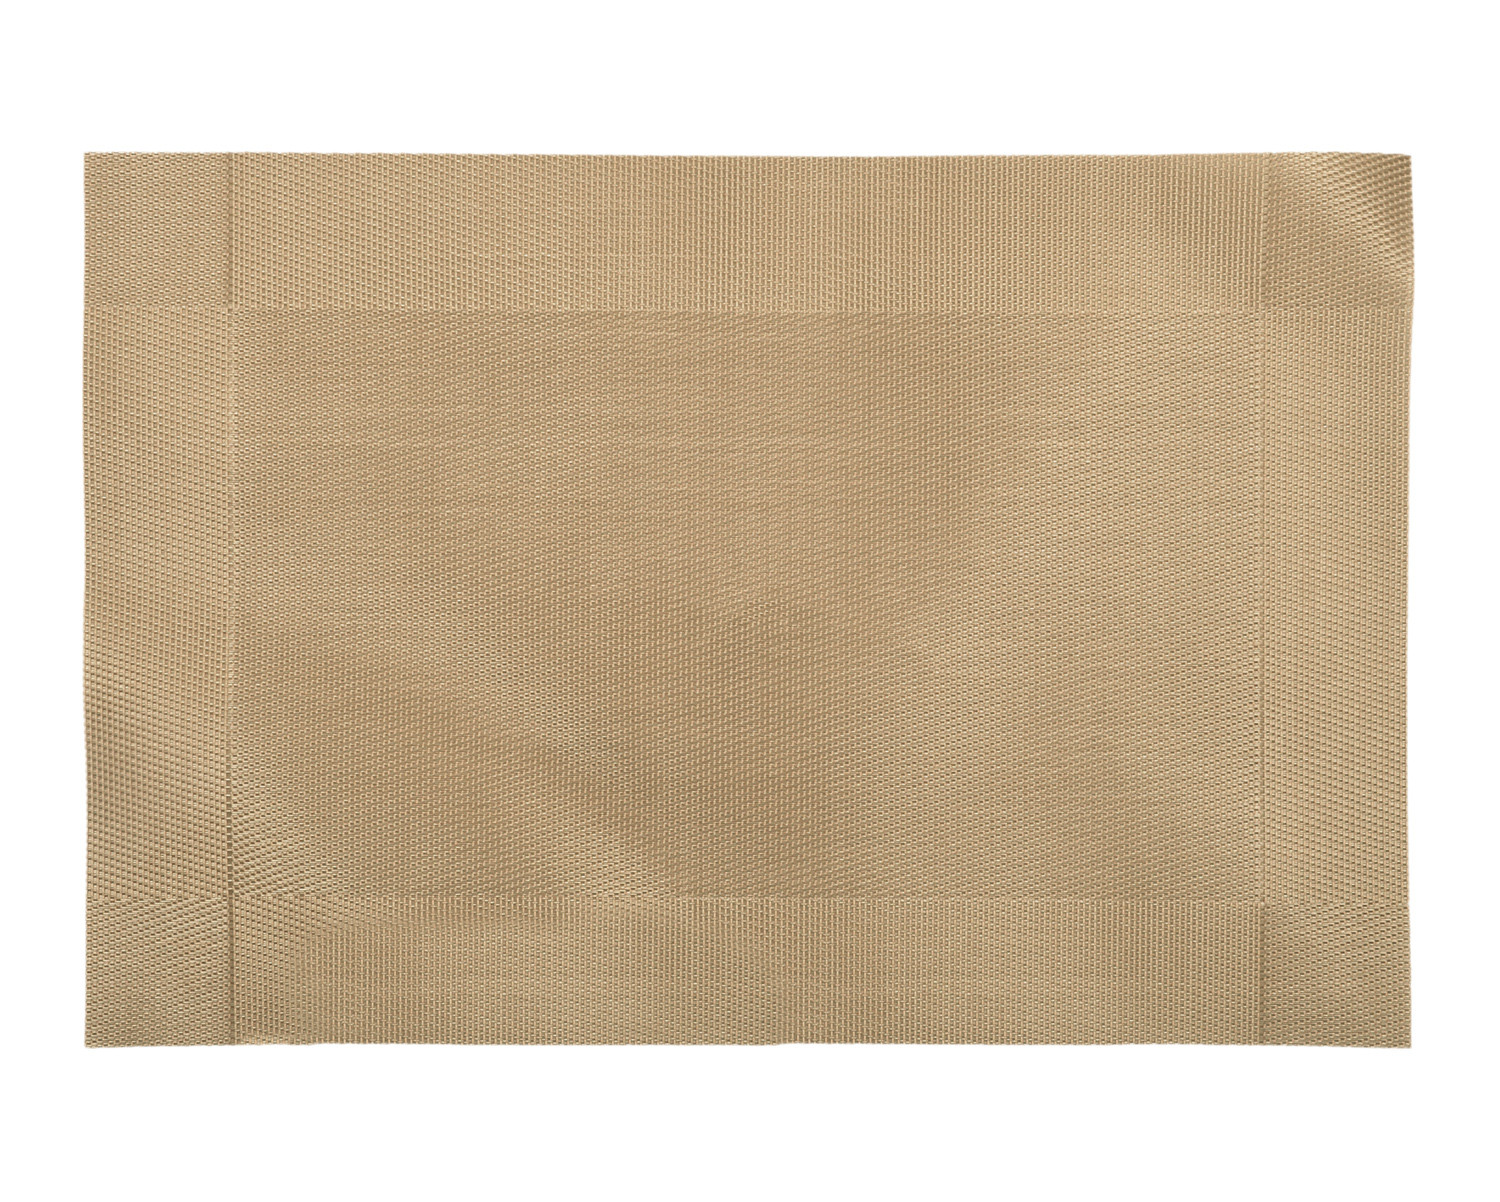 Kuber Industries Reversible Non-Slip Wipe Clean Heat Resistant PVC Placemats for Dining Table,(Light Brown)